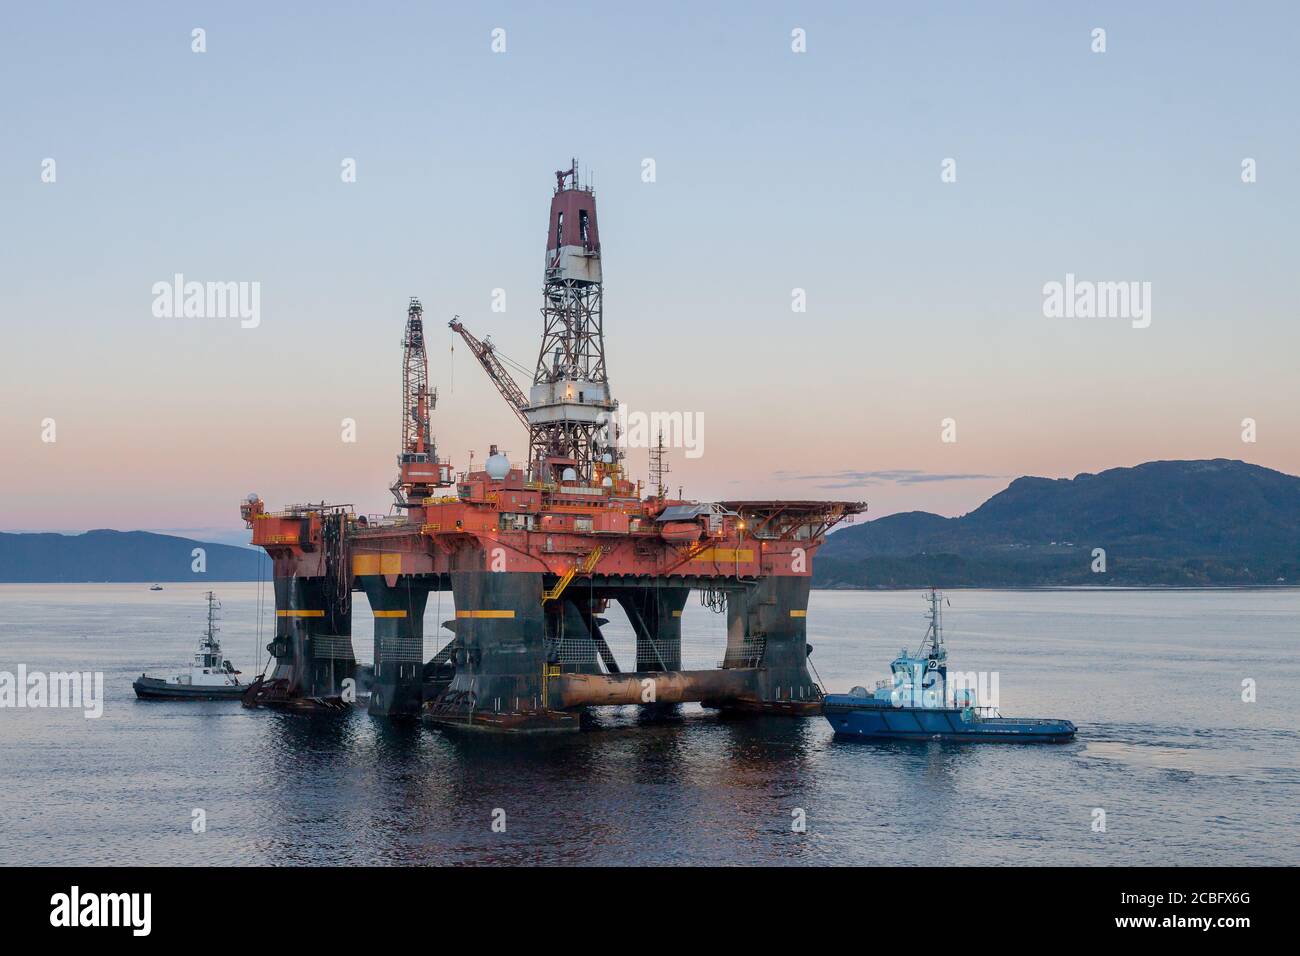 OELEN NORWAY - 2014 OCTOBER 16. The semi-submersible drilling rig West Alpha inside the Norwegian fjord in the morning with tug boats. Stock Photo